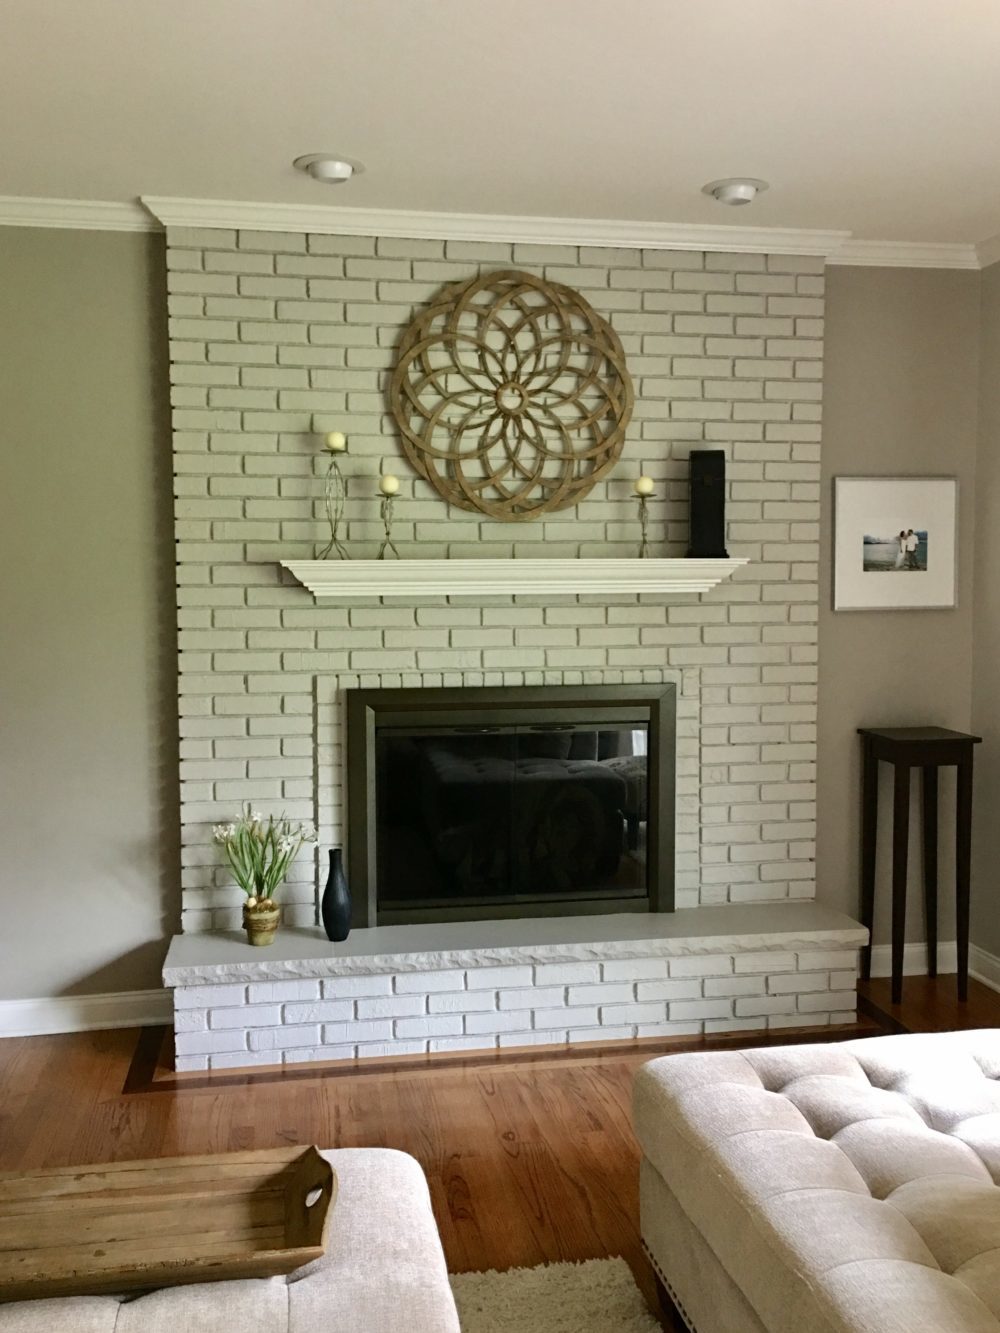 Light colored painted fireplace R&J Painting